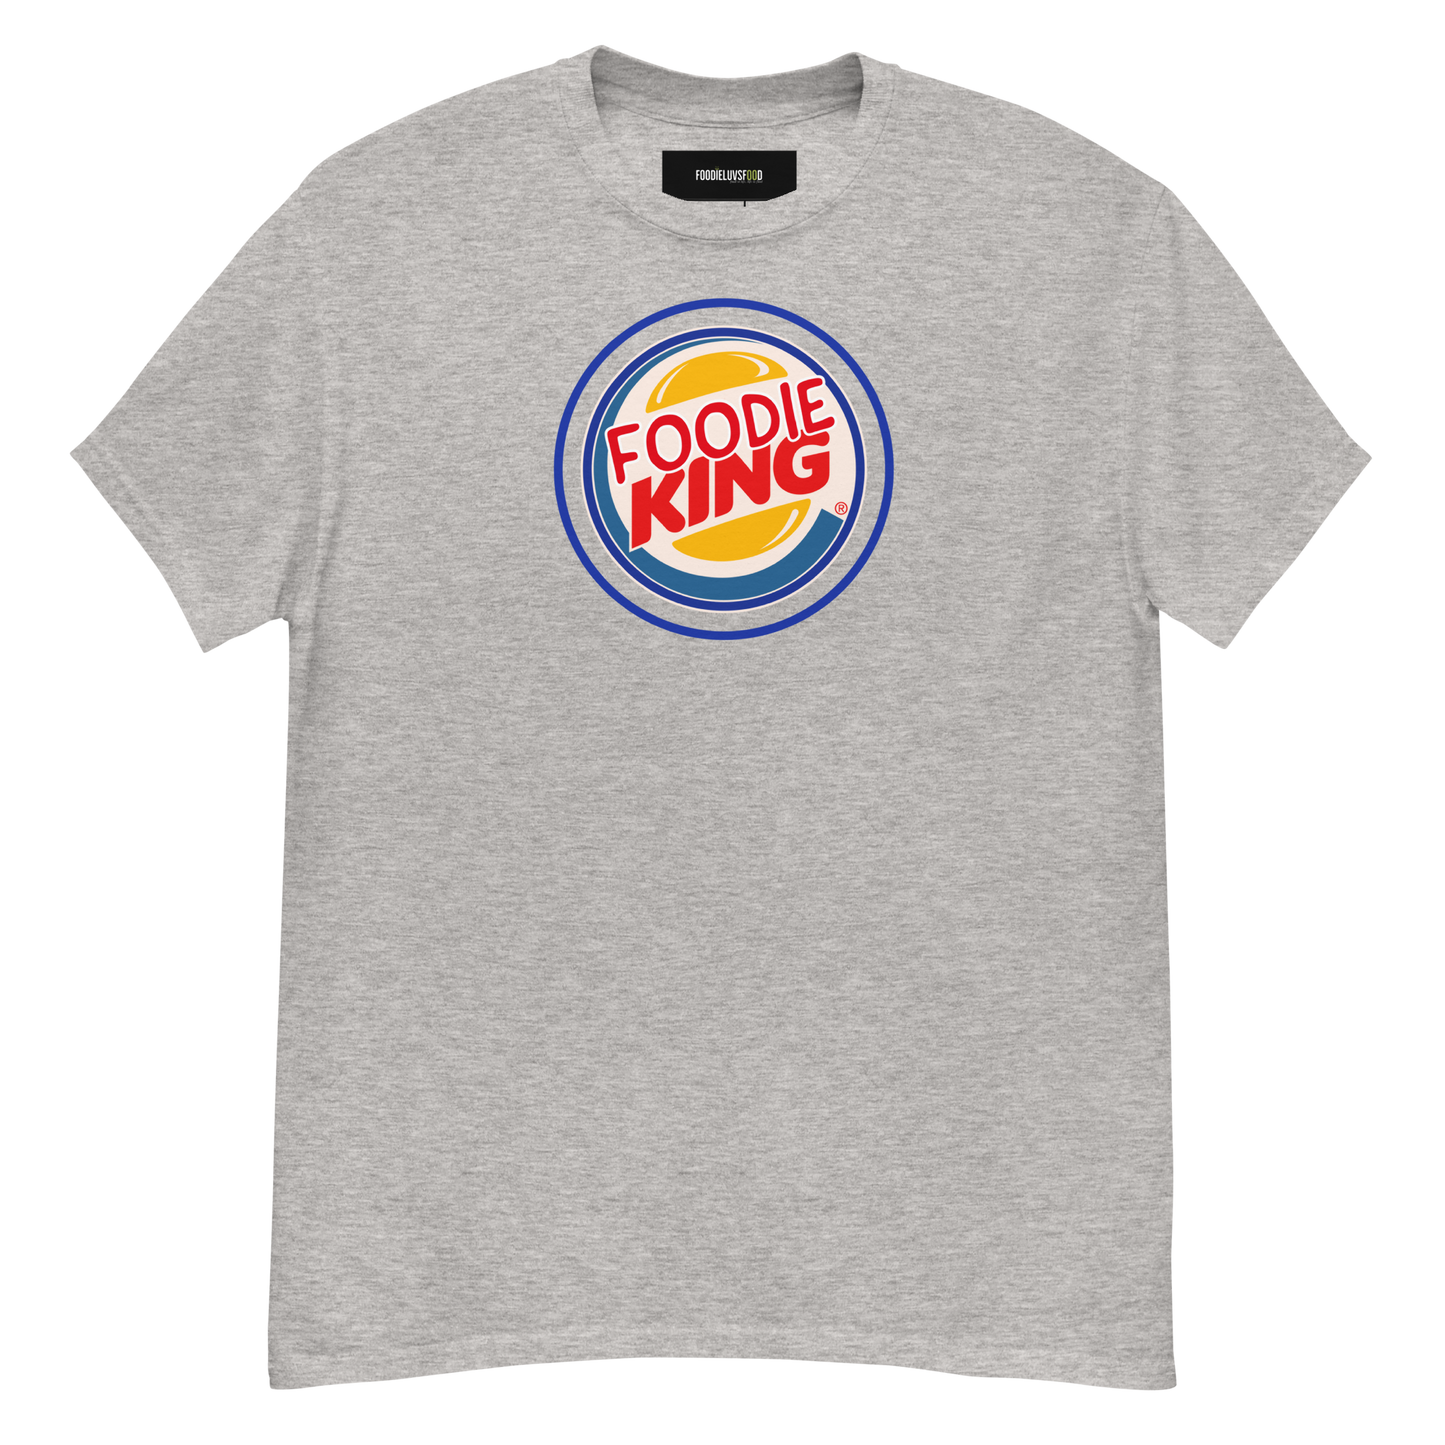 “Foodie King” Unisex Classic T-Shirt